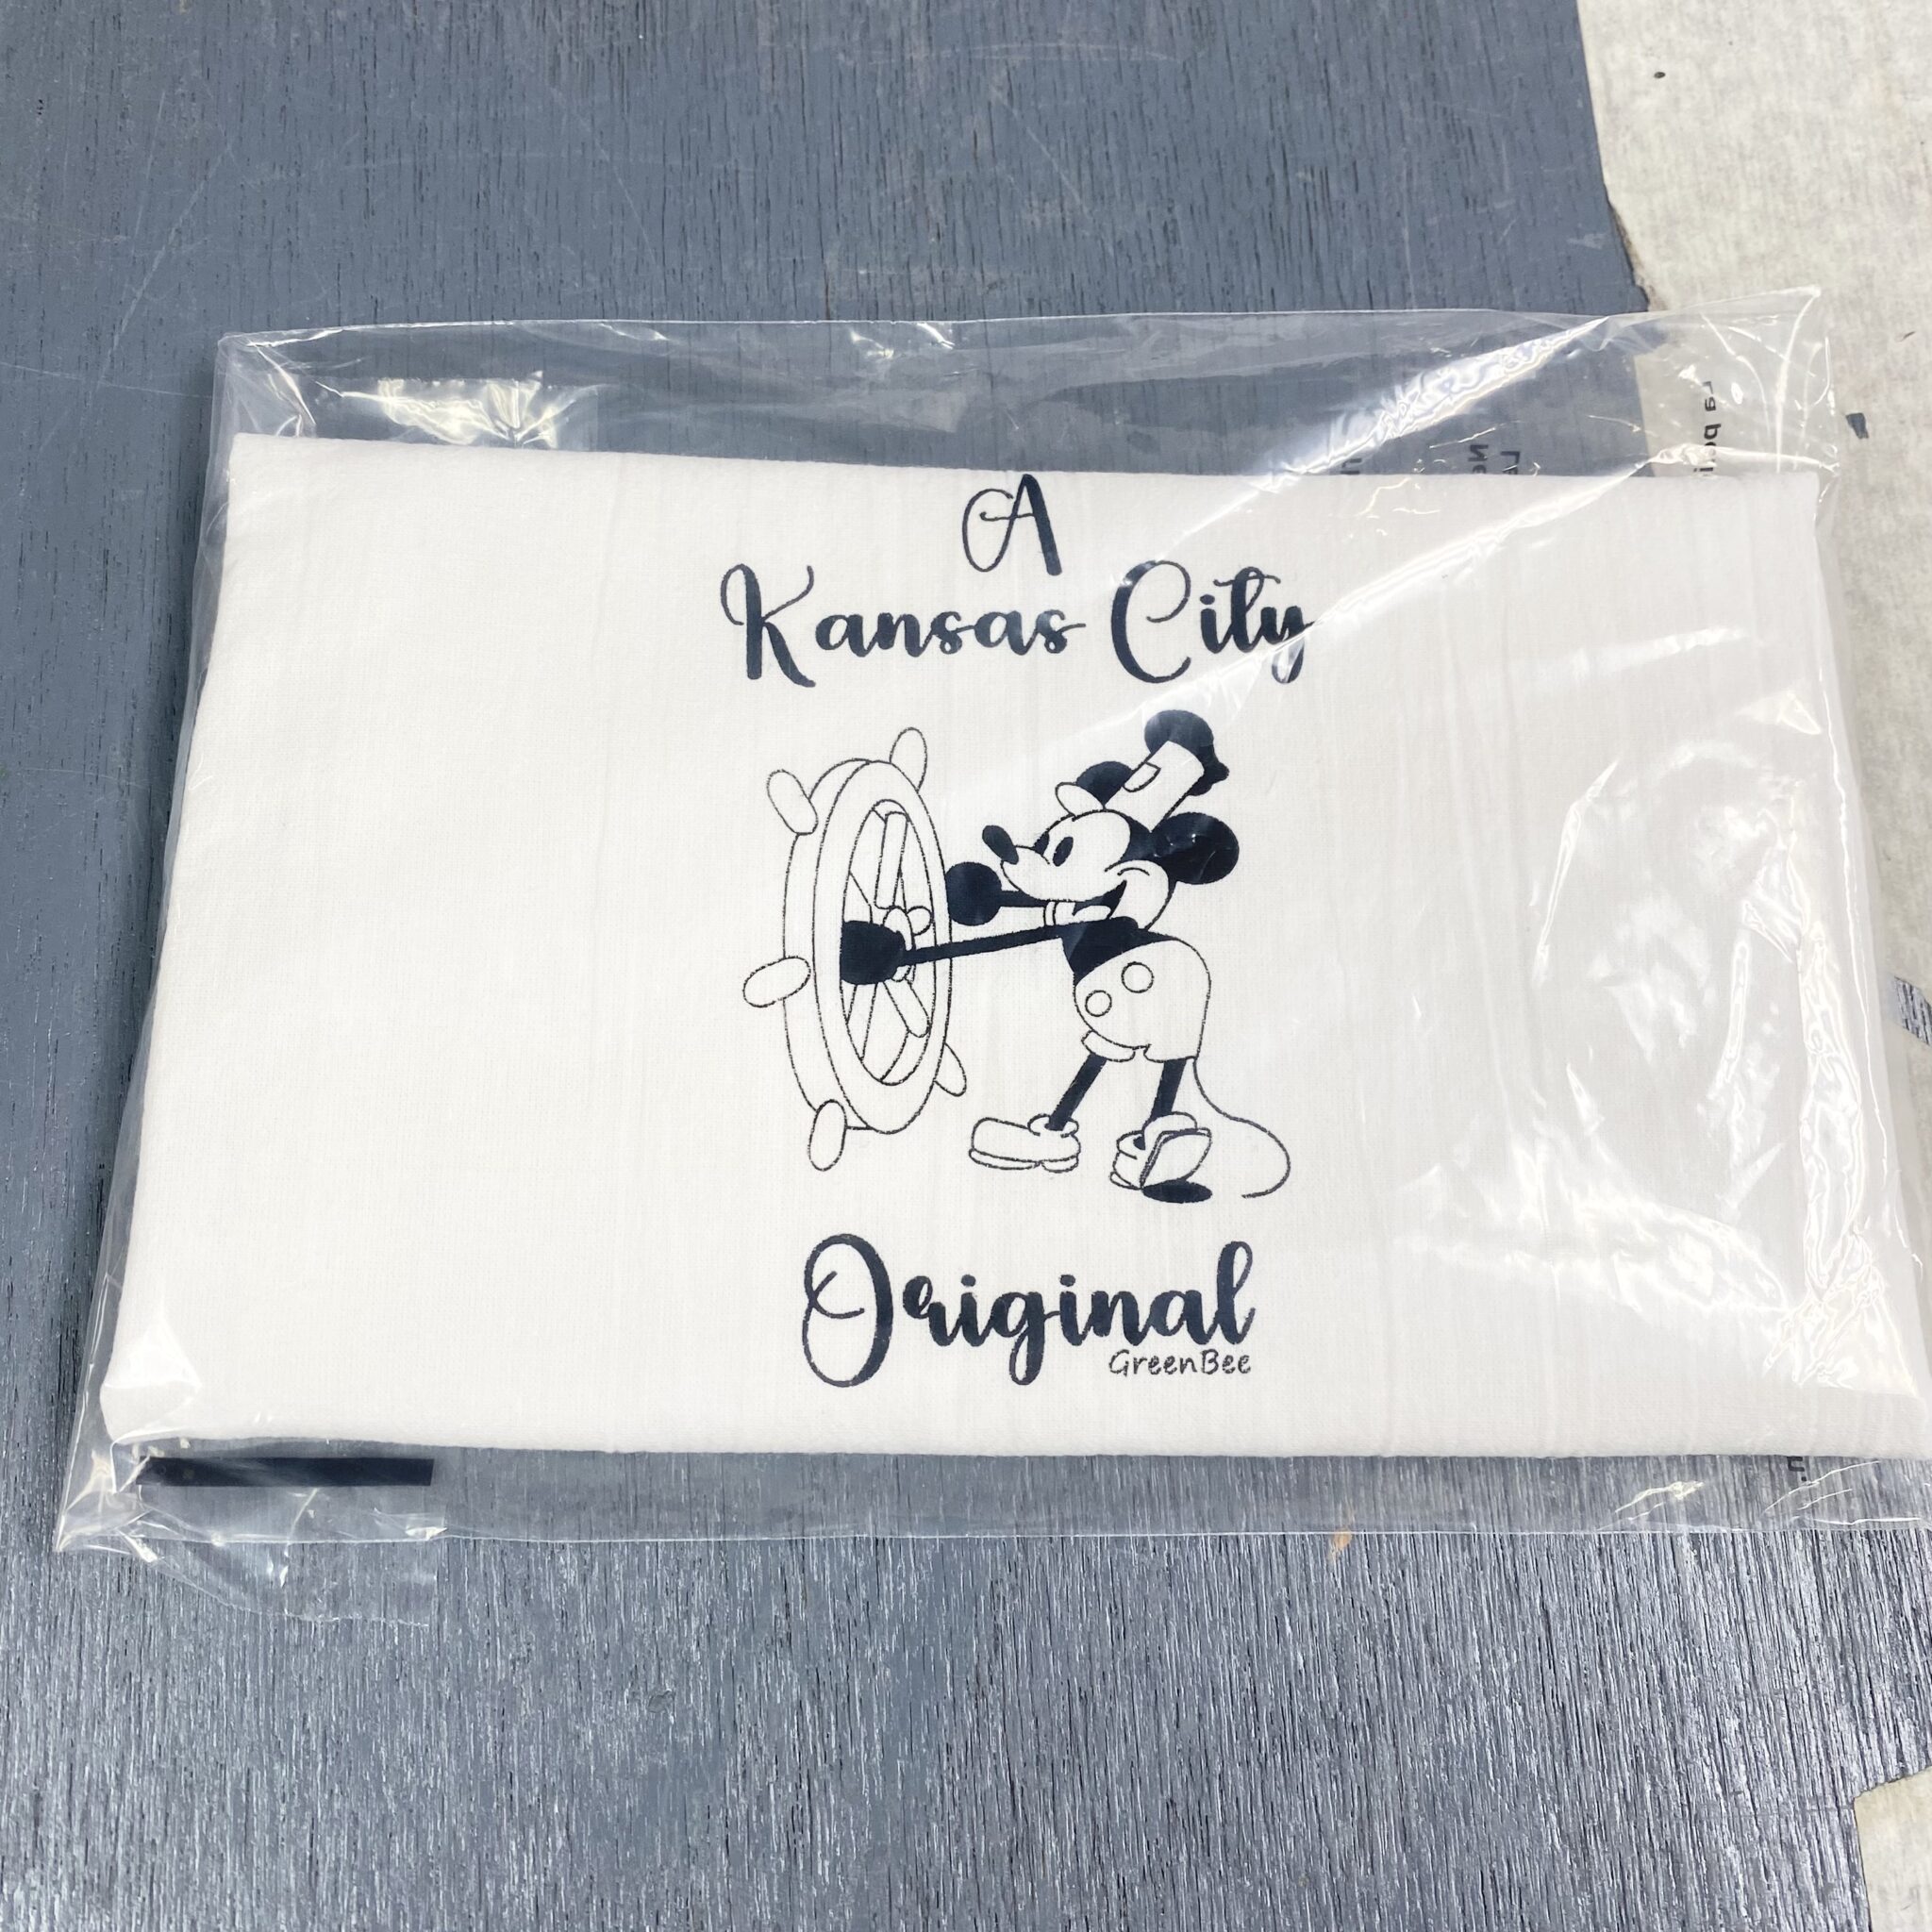 Kansas City steam boat willie Mickey Mouse kitchen towel